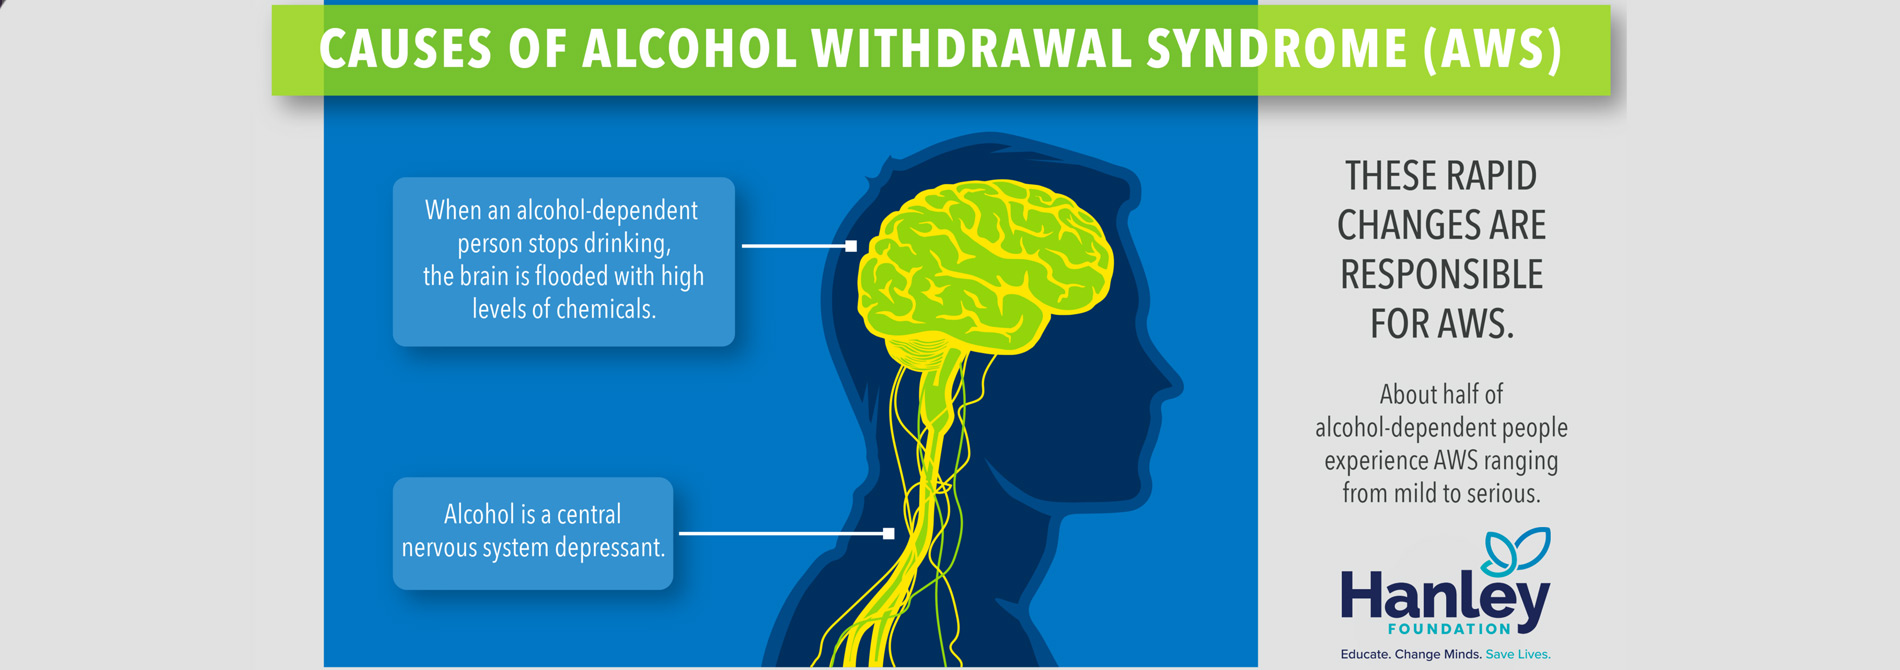 What Is the Timeline for Alcohol Withdrawal?